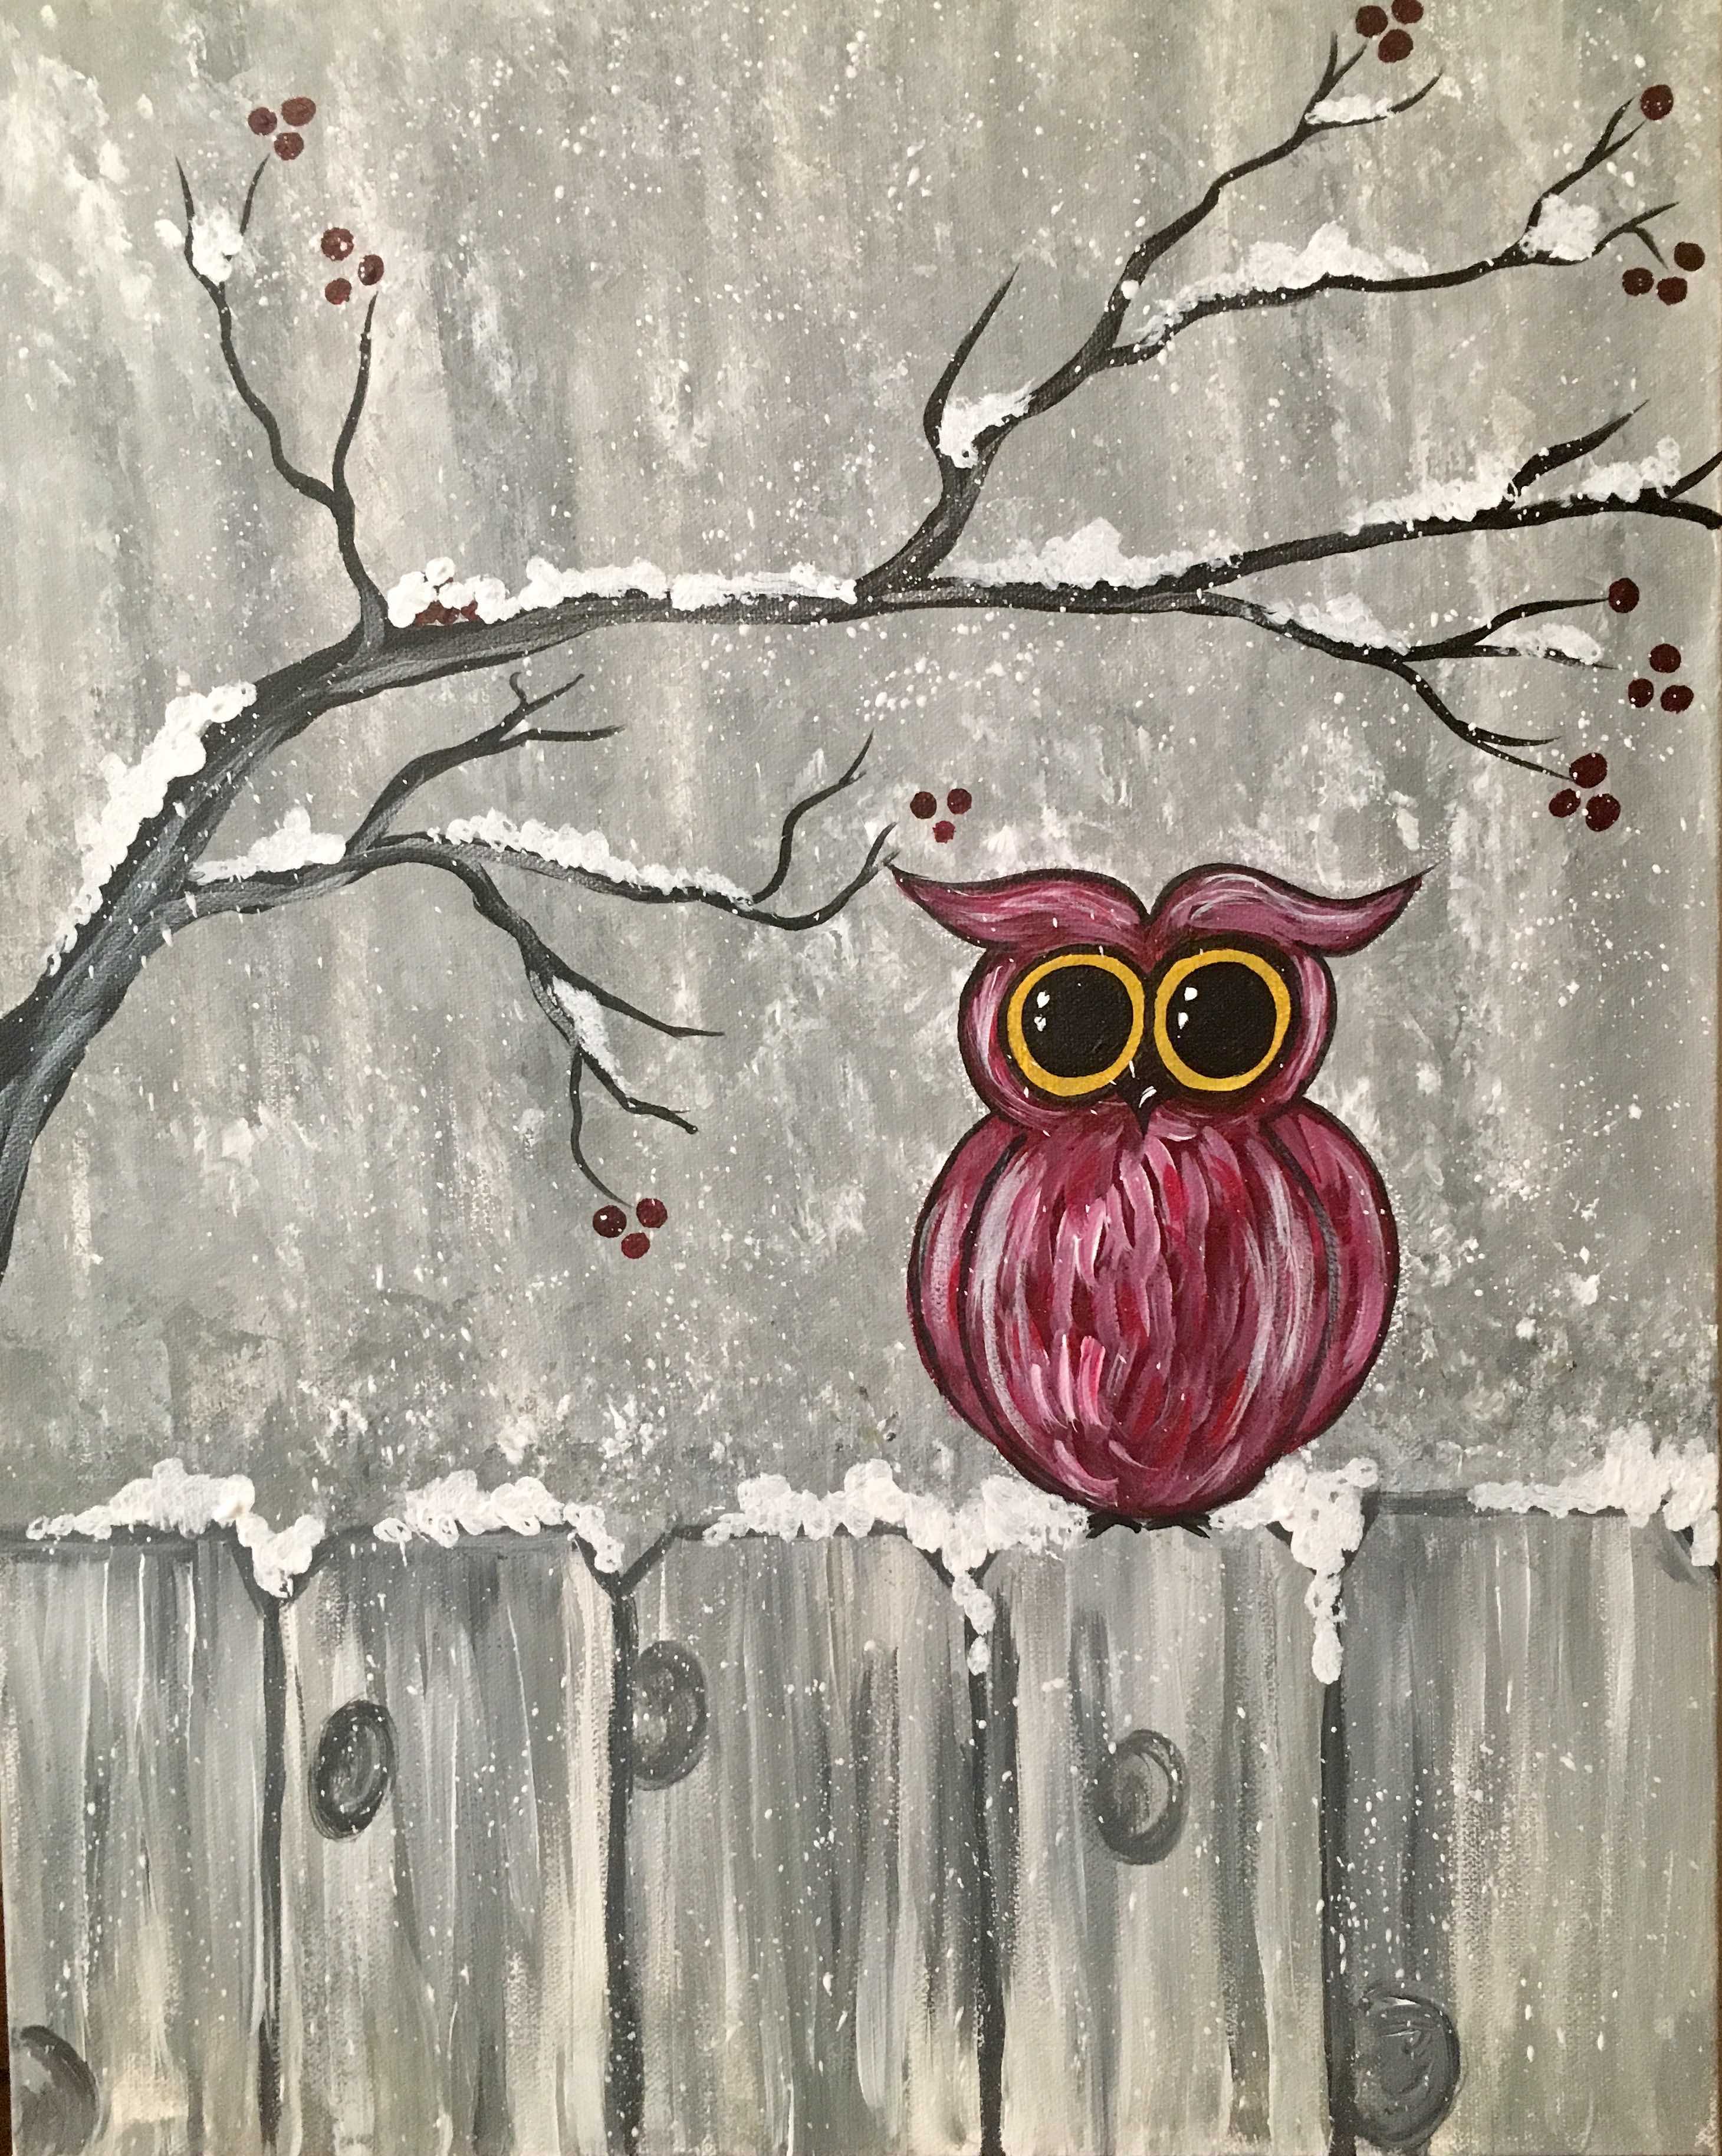 Frosty Winter Owl - Pinot's Palette Painting